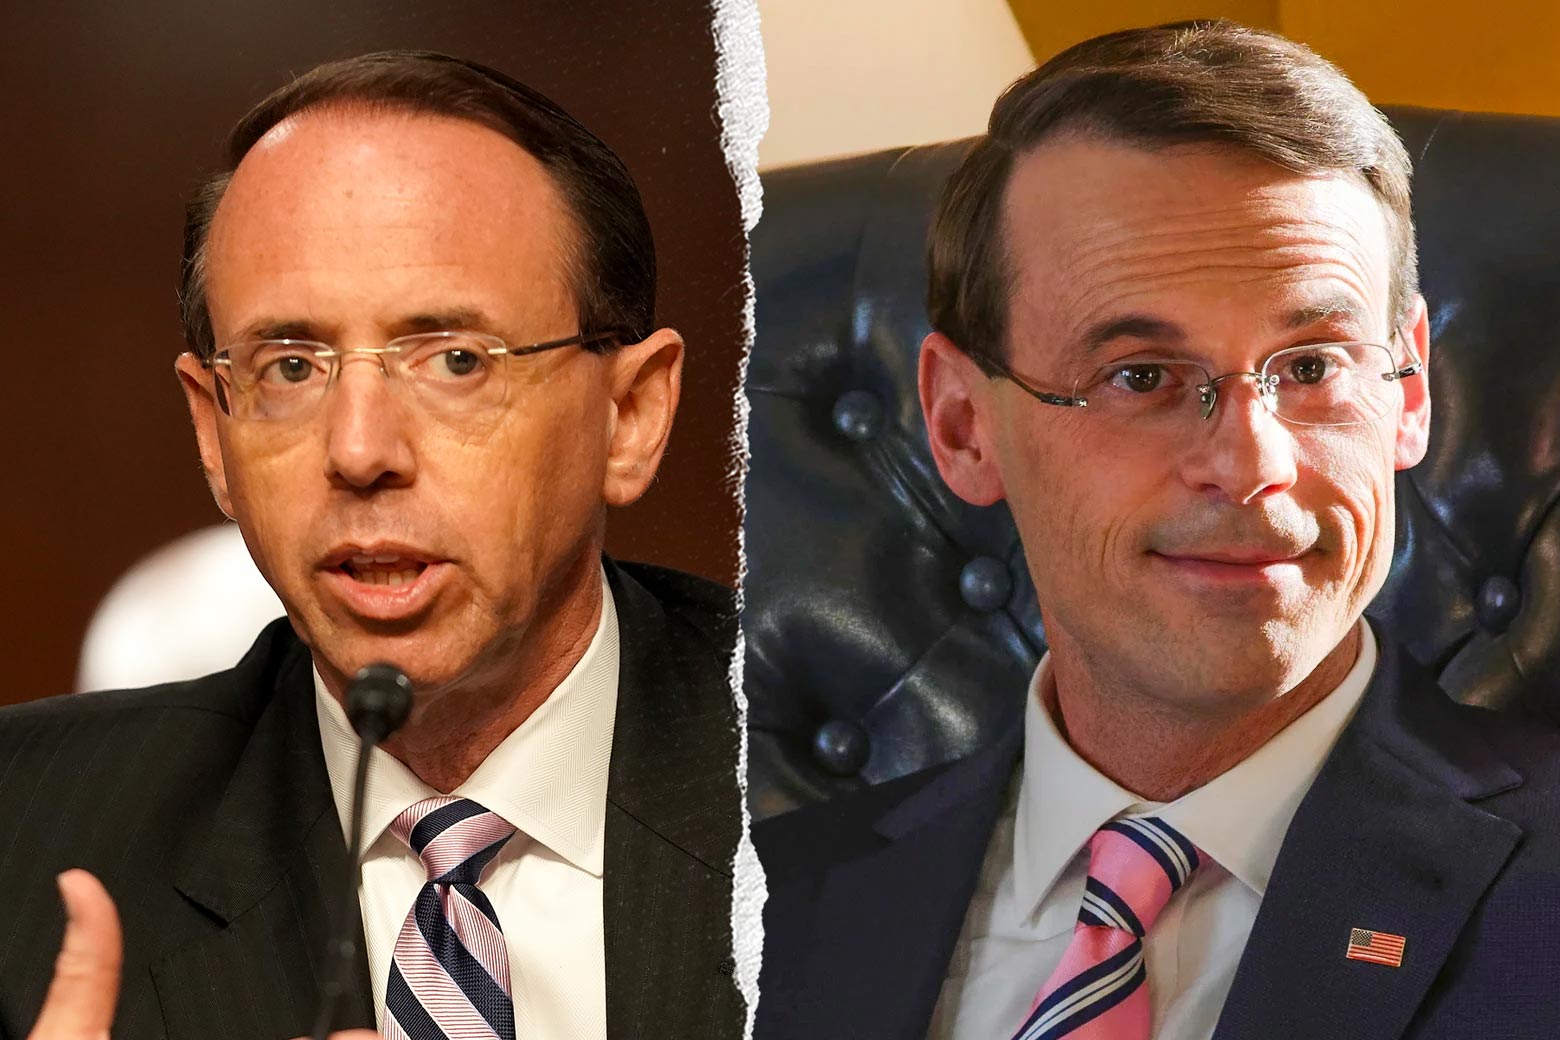 Rod Rosenstein, and Scoot McNairy as Rod Rosenstein in The Comey Rule.